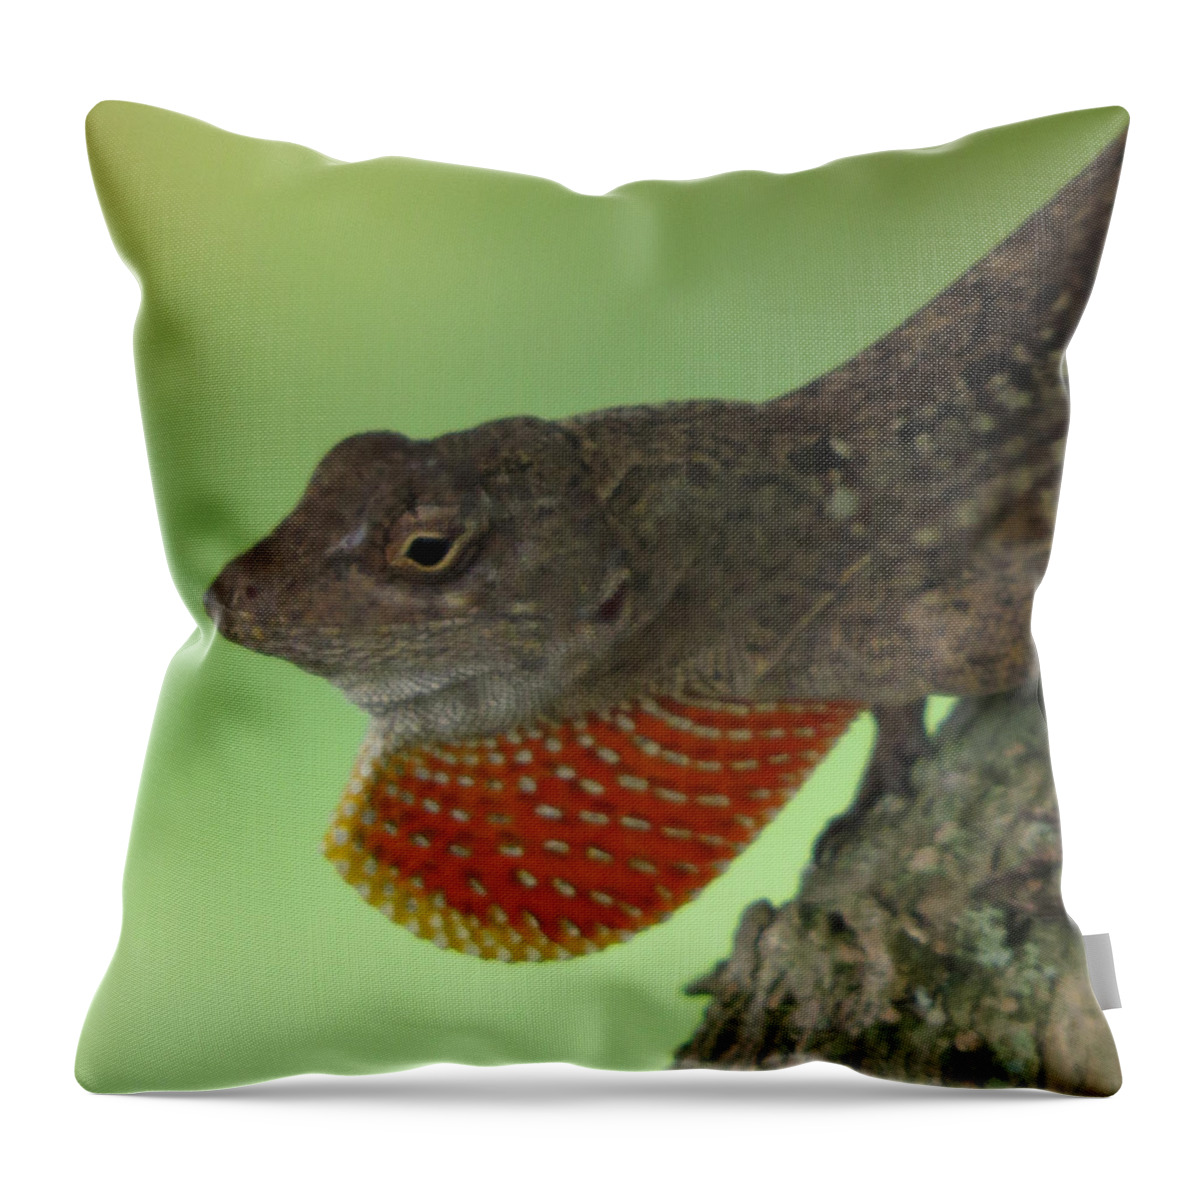 Lizard Throw Pillow featuring the photograph I'll Show You by T Guy Spencer